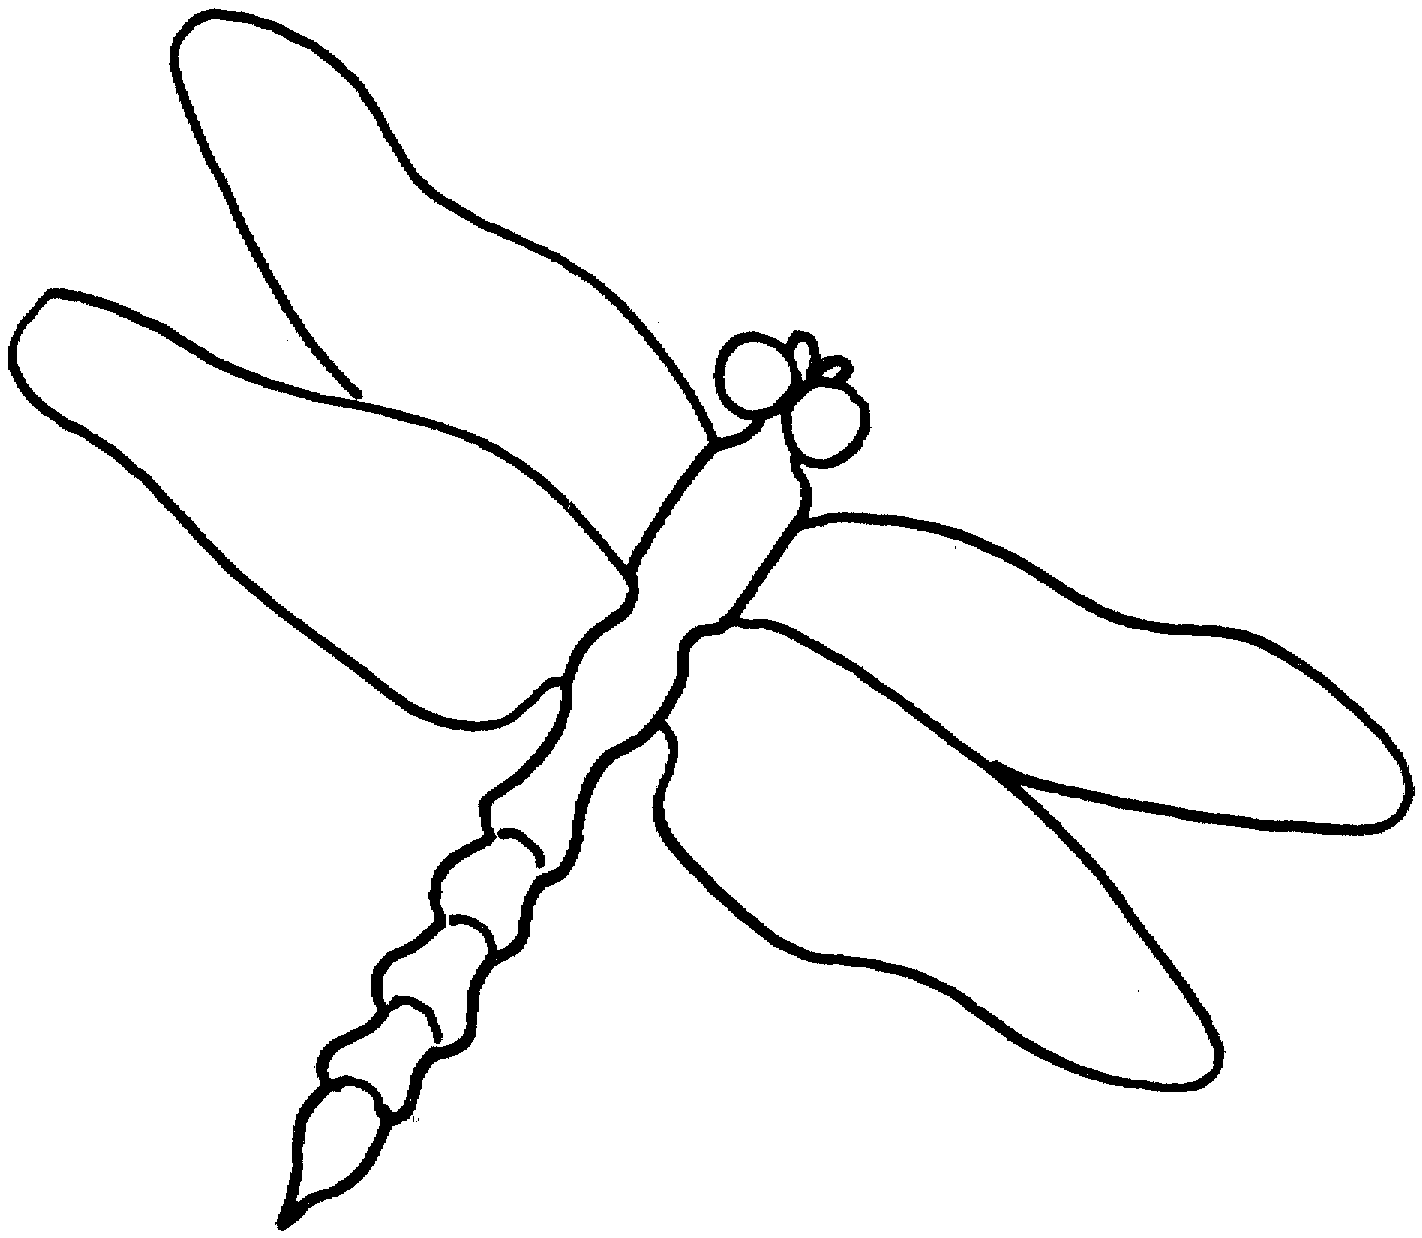 23 Dragonfly Line Drawing Free Cliparts That You Can Download To You